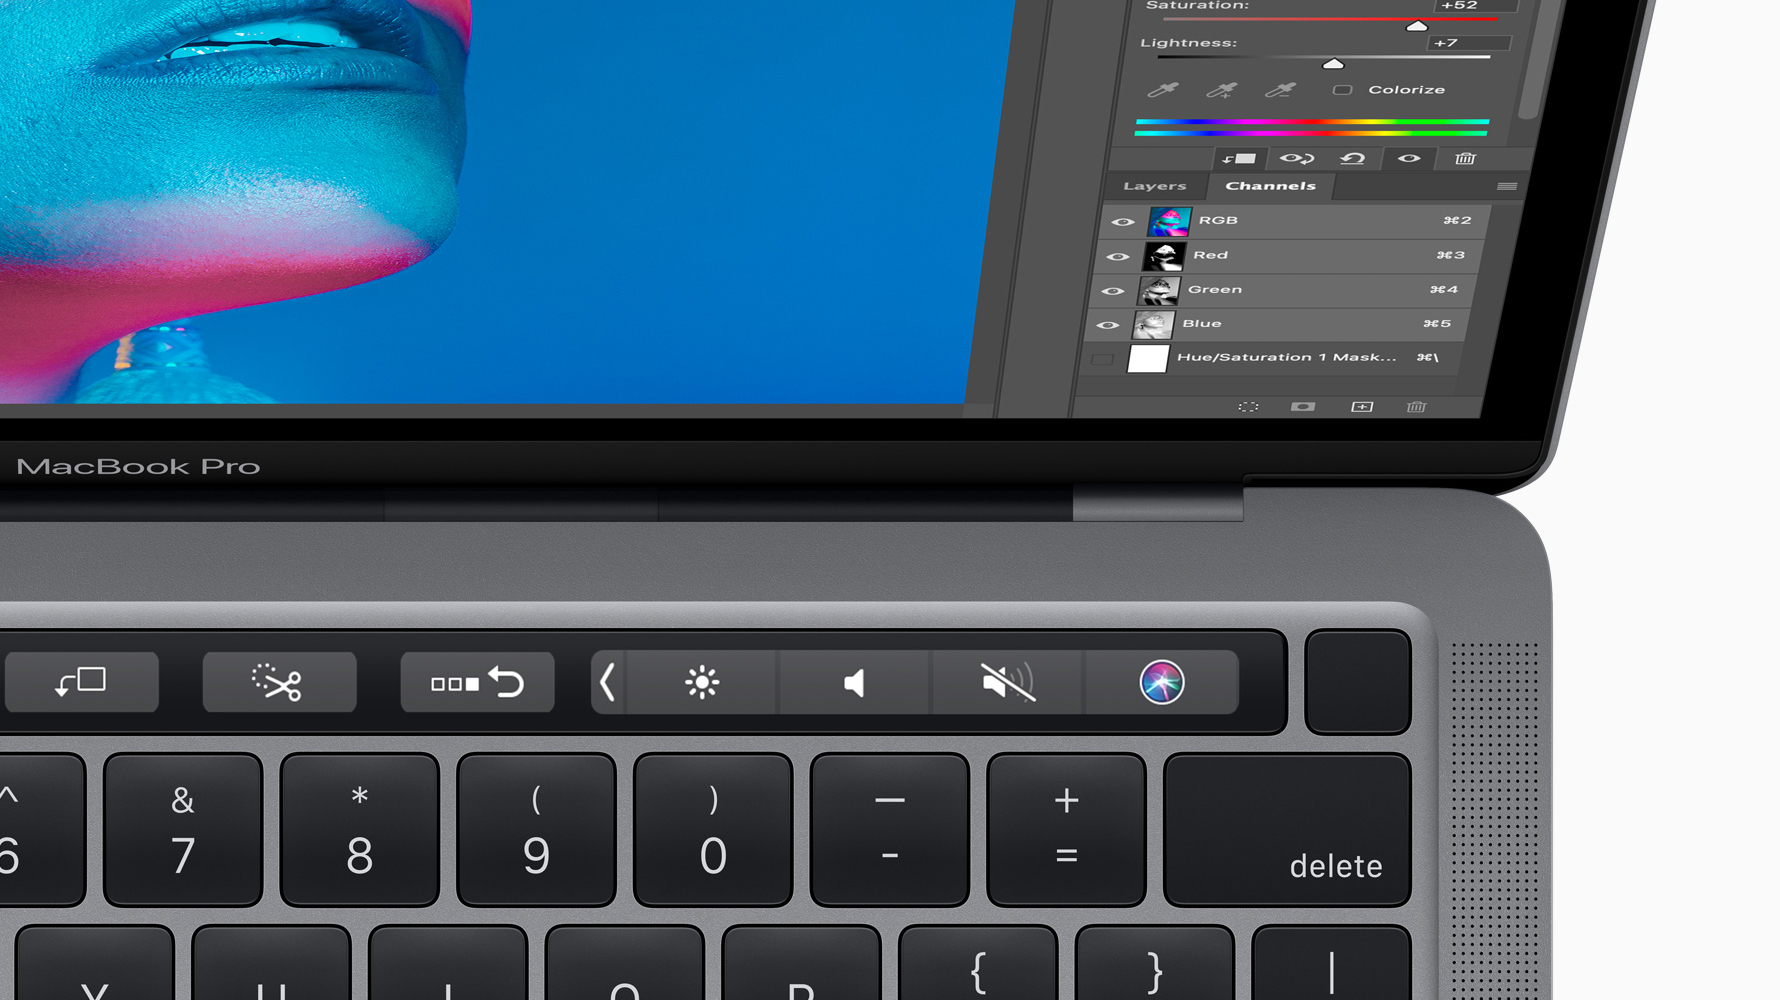 Apple reveals new 13-inch MacBook Pro with M1